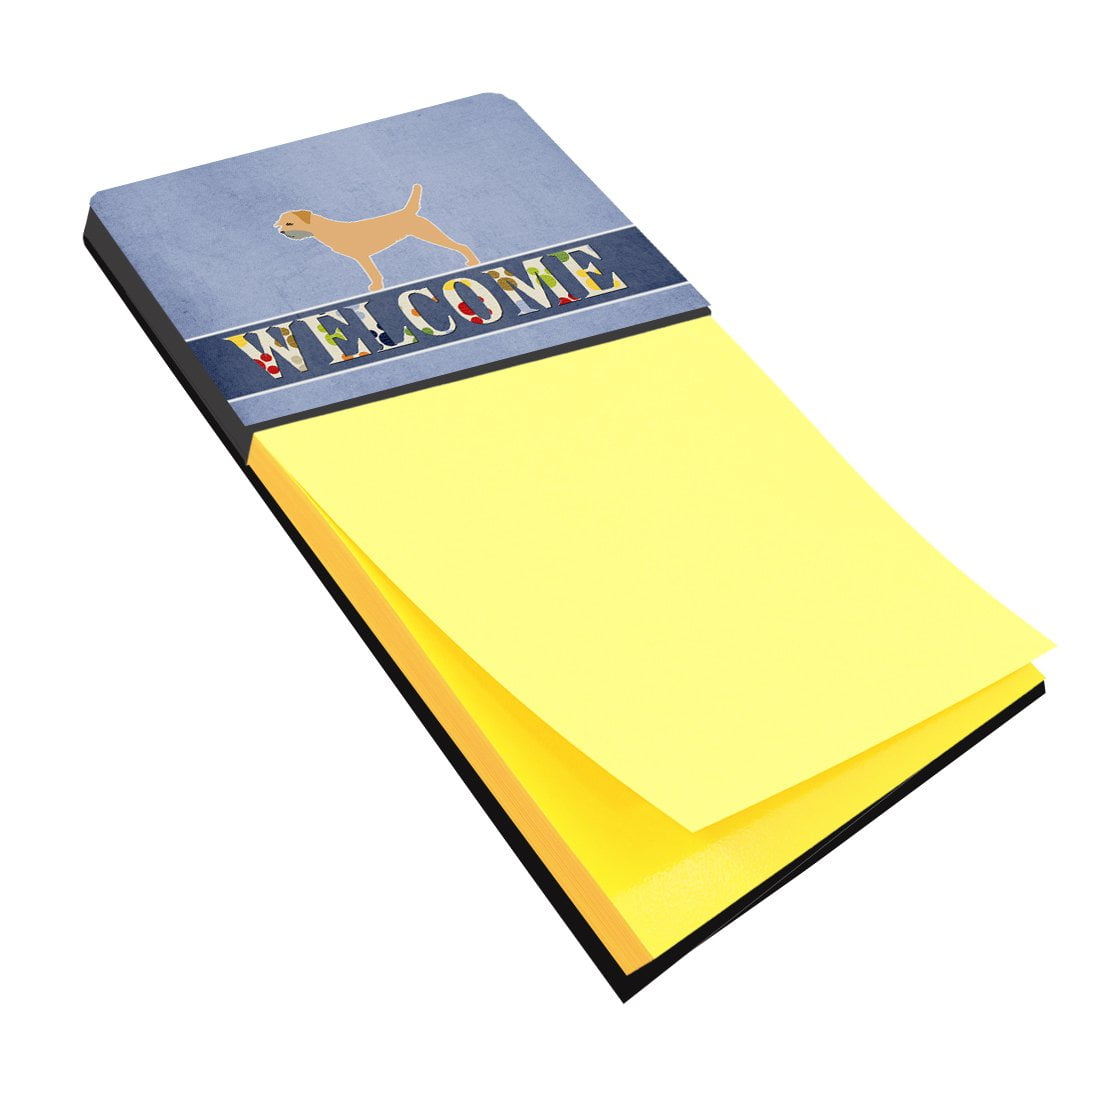 Bb5493sn Border Terrier Welcome Sticky Note Holder